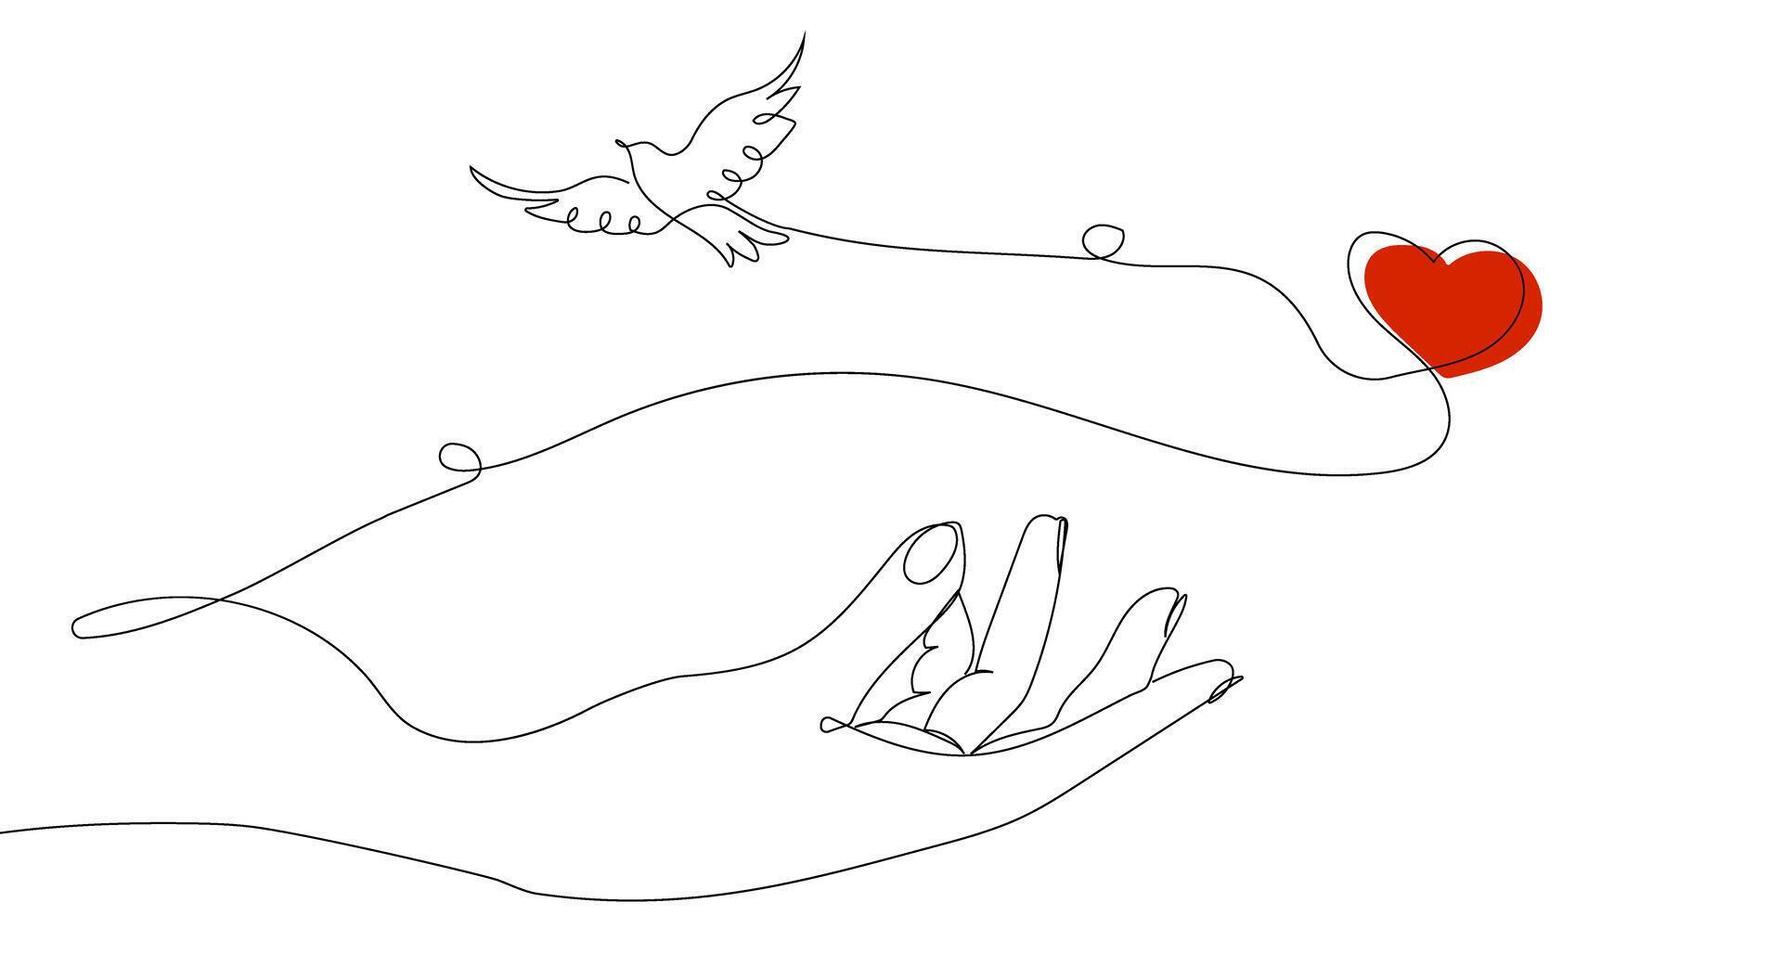 A dove flying into the sky from an outstretched hand. The concept of friendship, peace, help, support. Hand drawing one solid line. . vector